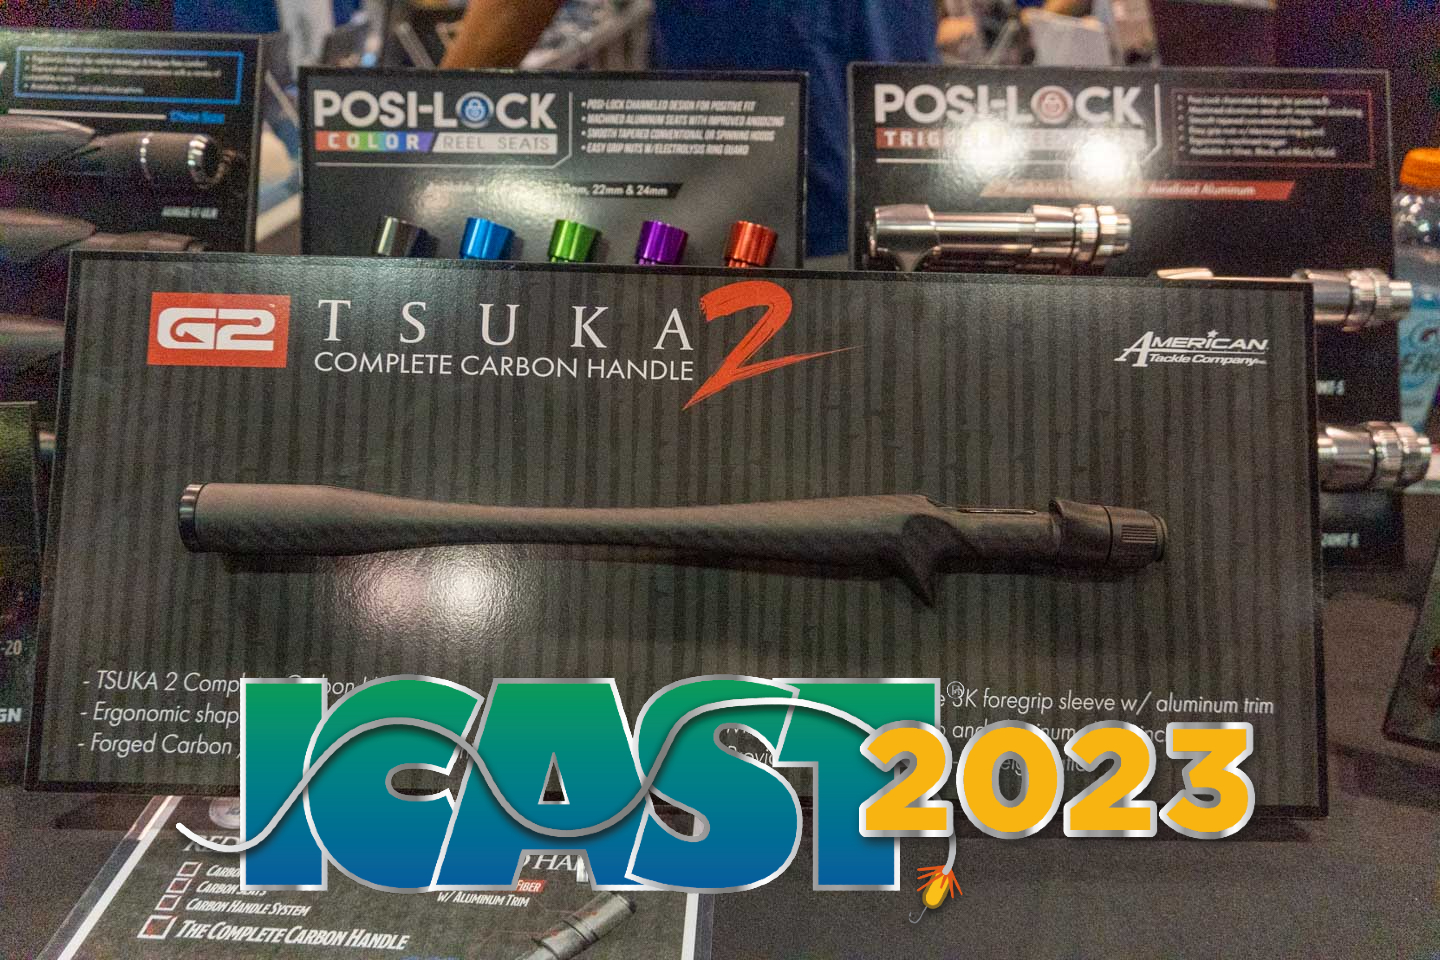 Hot new products from ICAST 2018 - Bassmaster